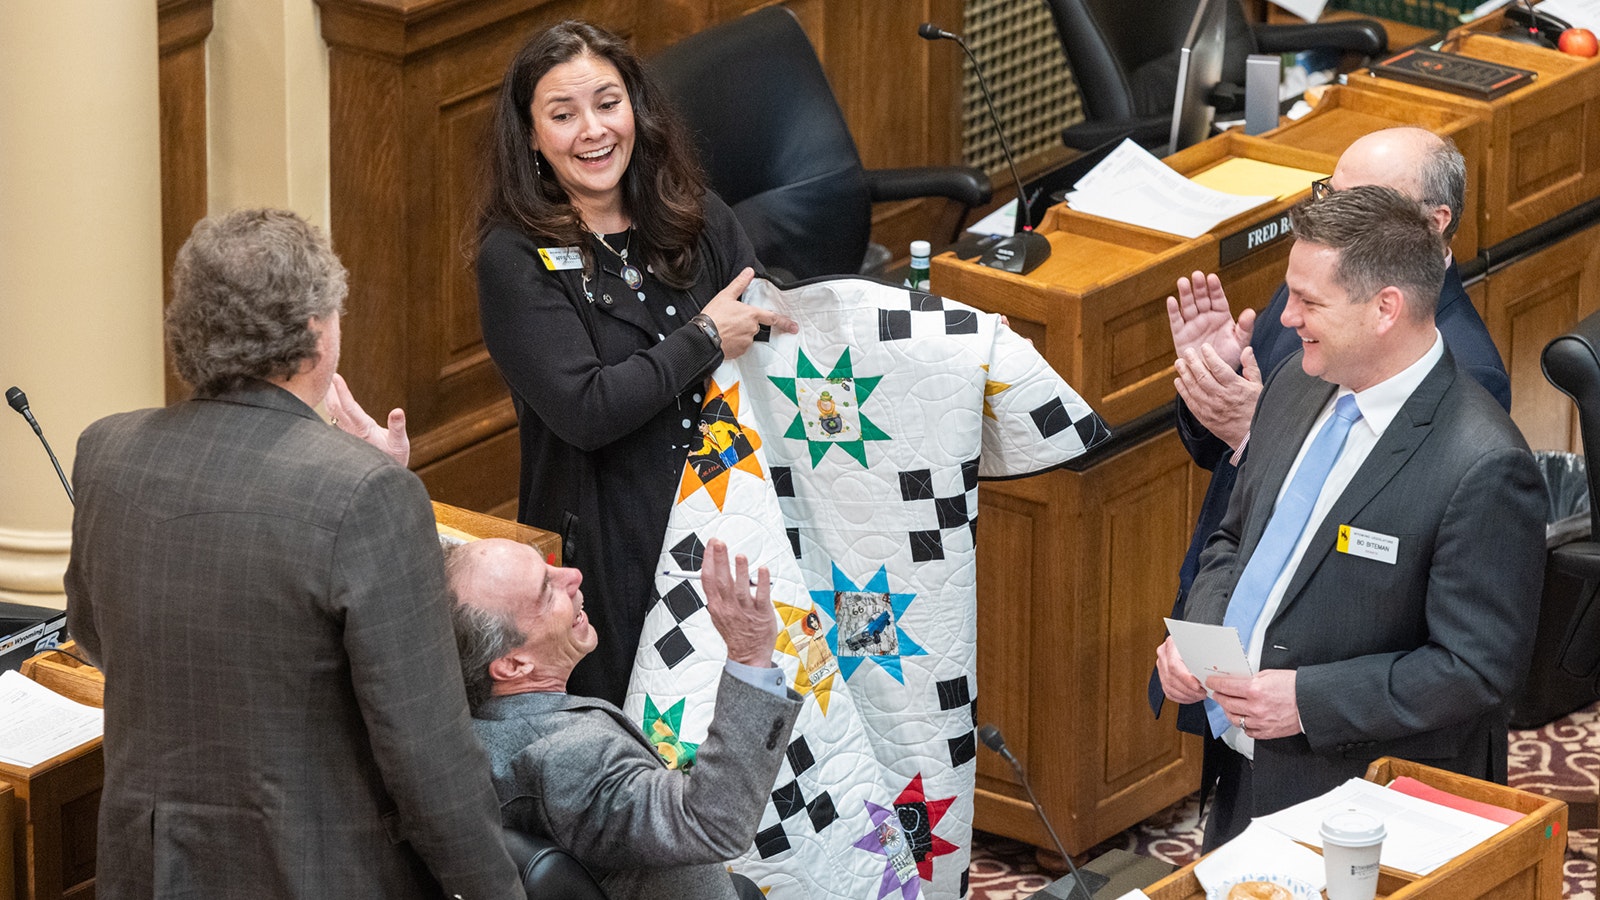 State Sen. Affie Ellis with a quilt she made with individualized squares for each of the 31 members of the Wyoming Senate.